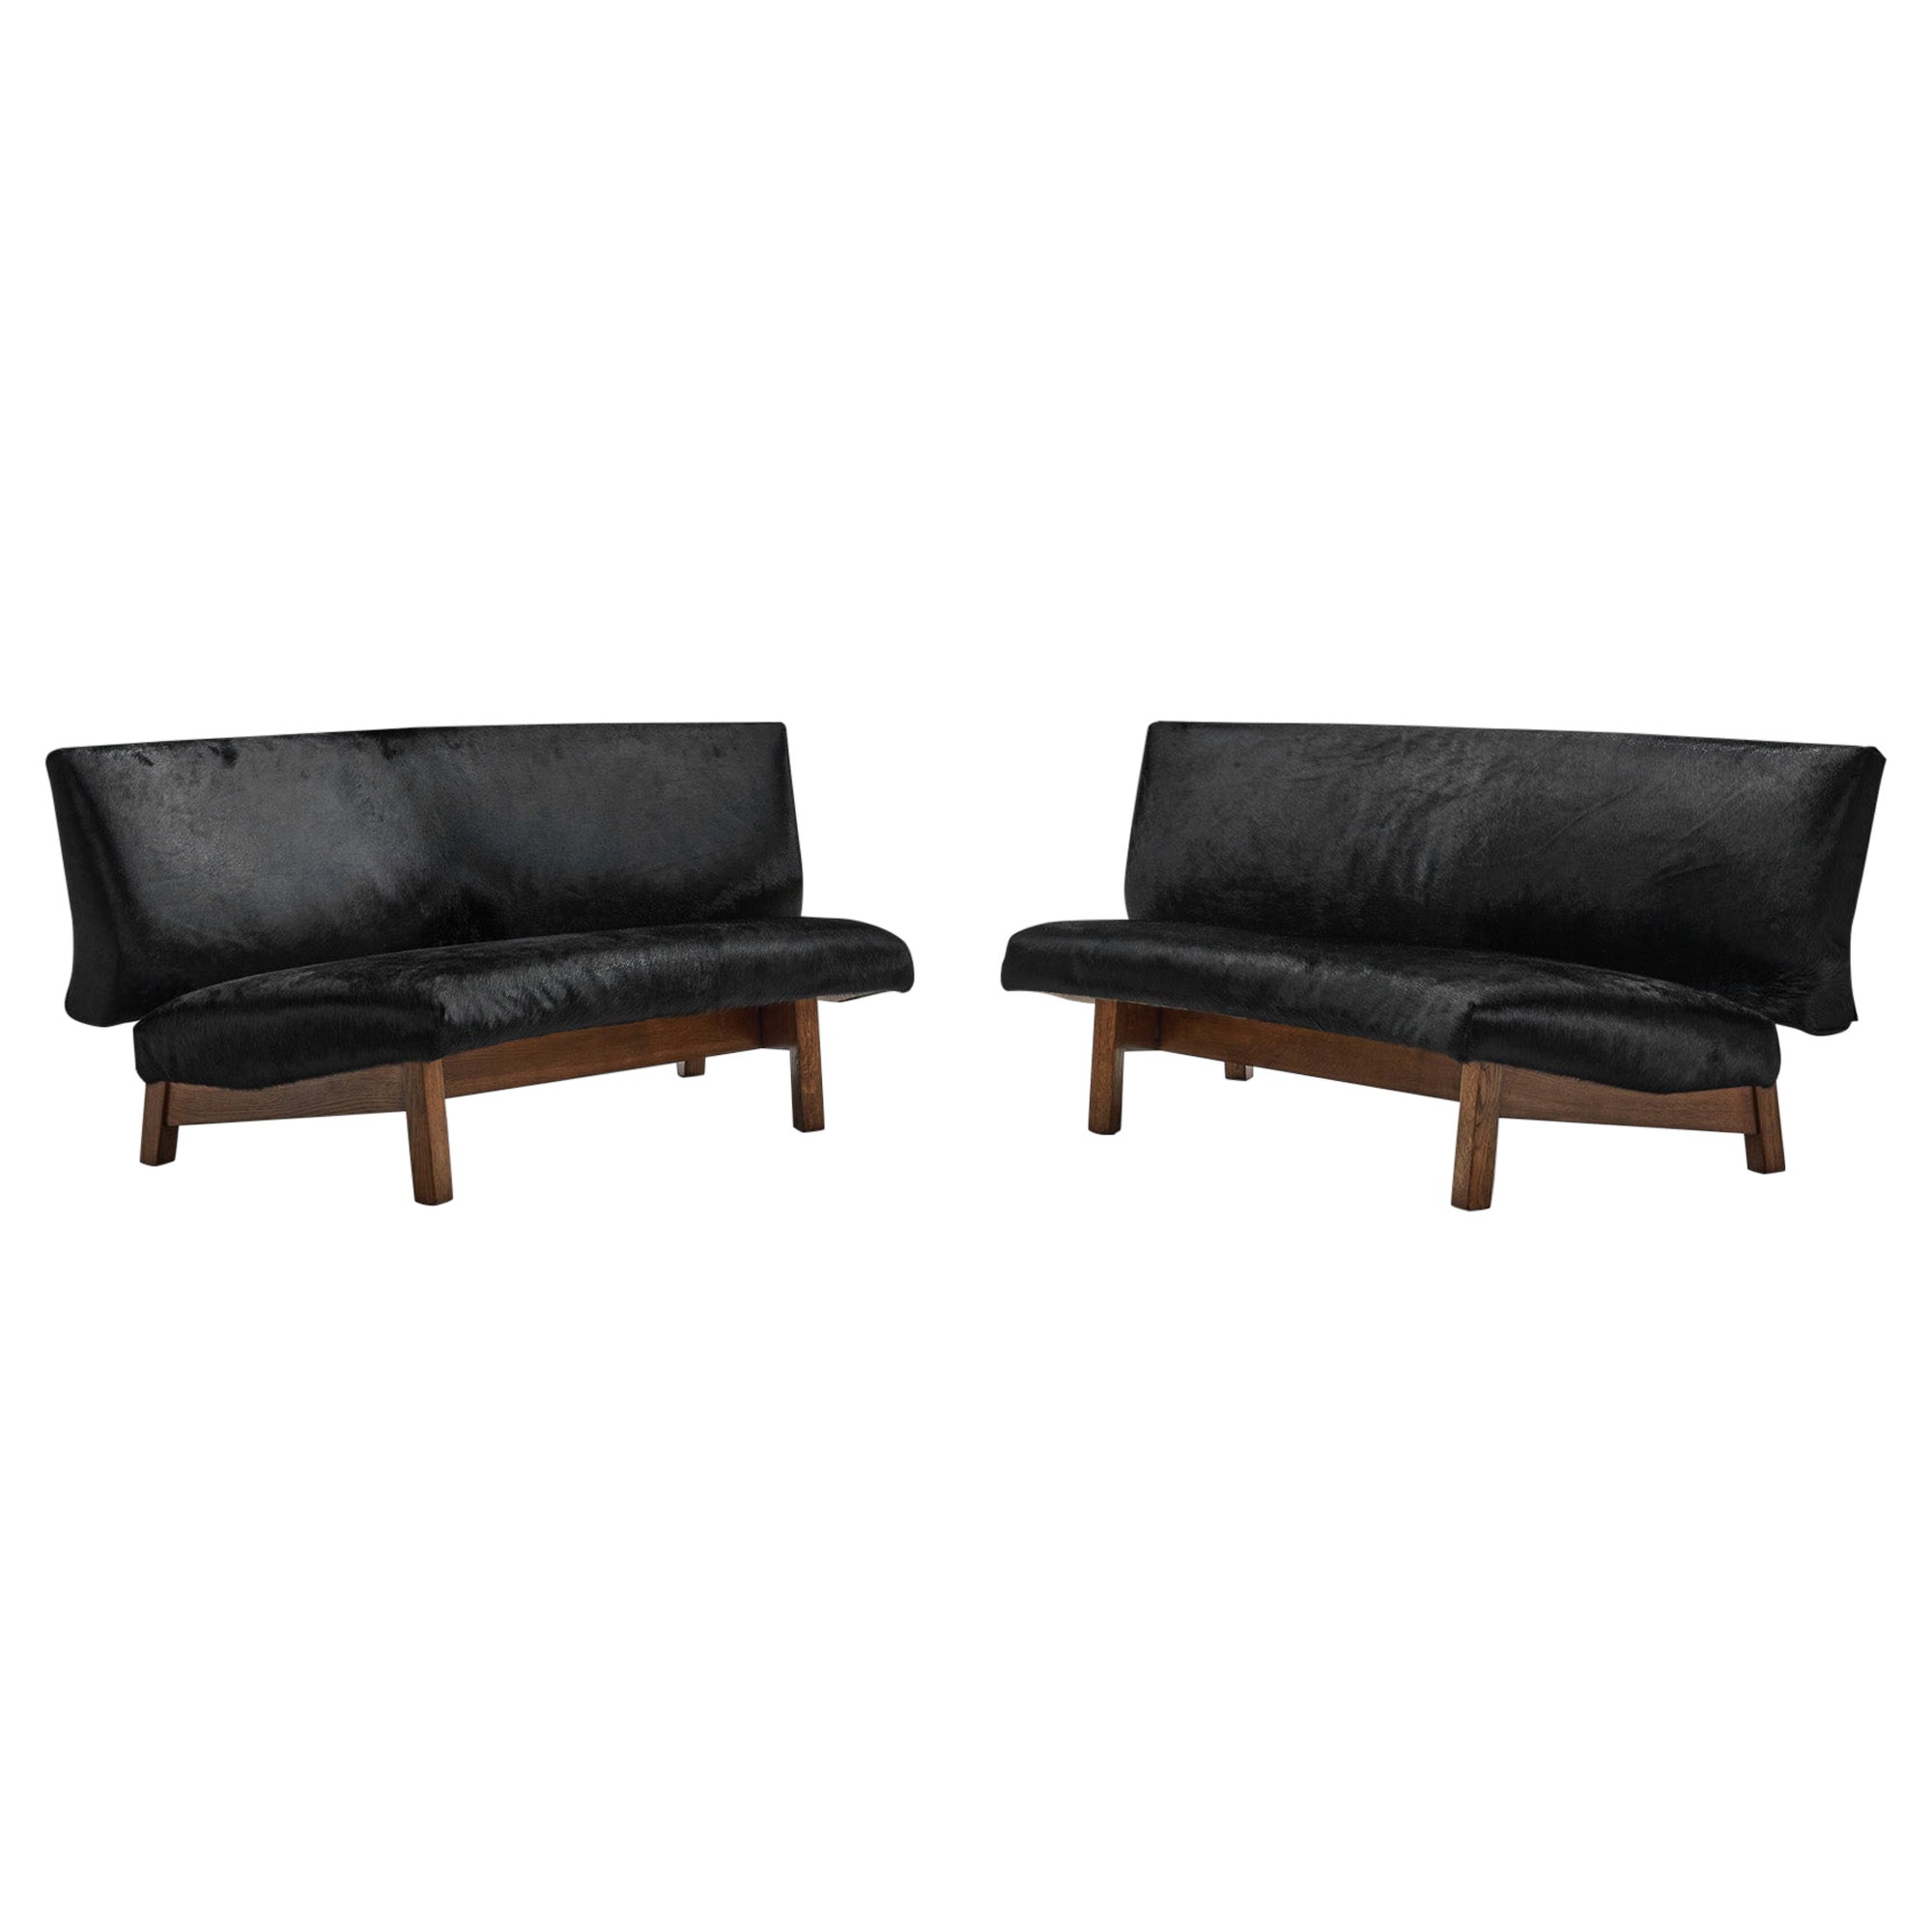 European Mid-Century Two Part Sofa in Black Cow Hide, Europe Ca 1950s For Sale